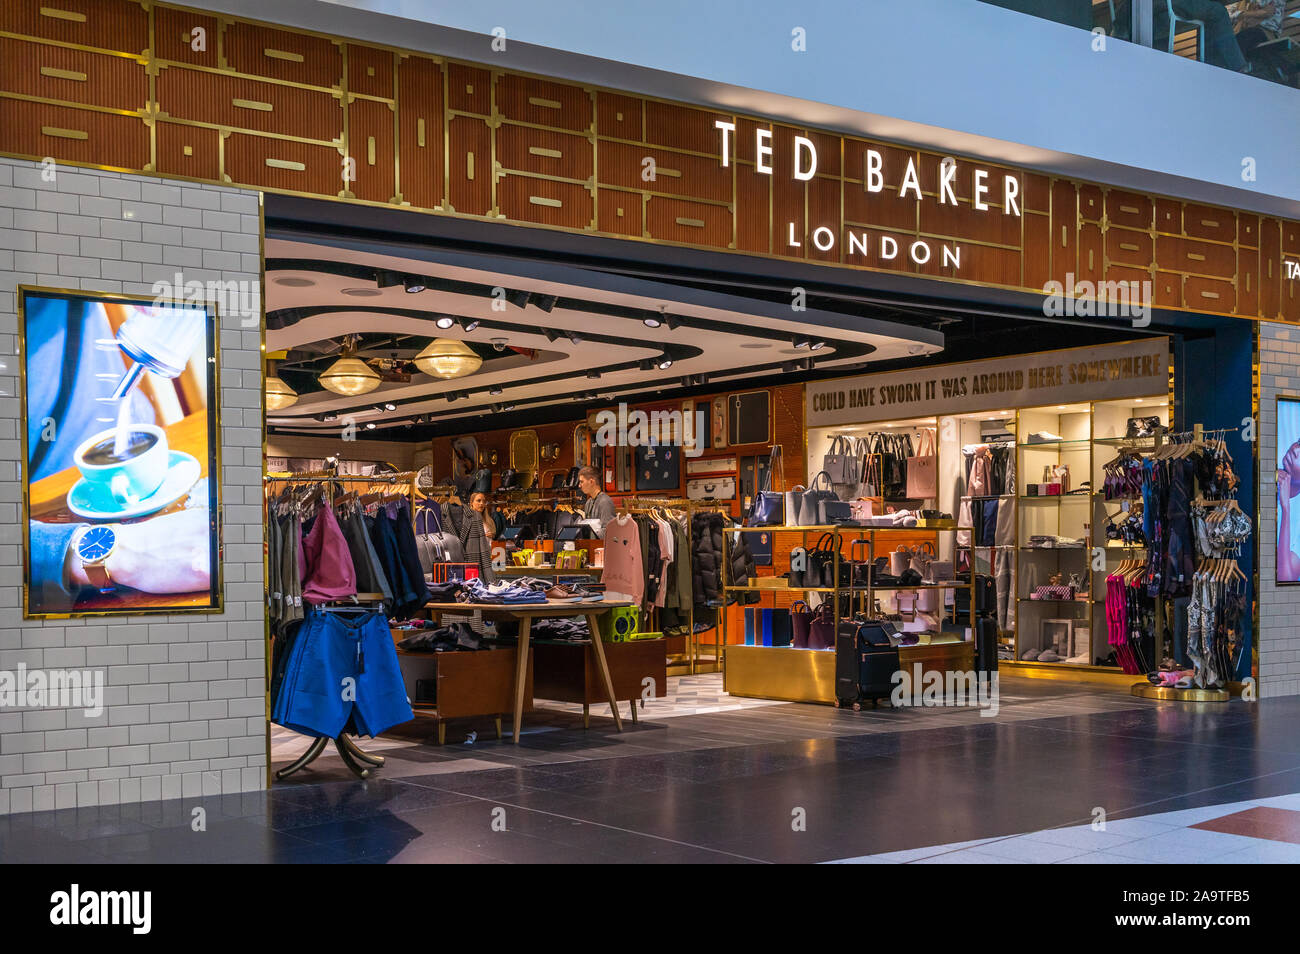 Ted baker london hi-res stock photography and images - Alamy